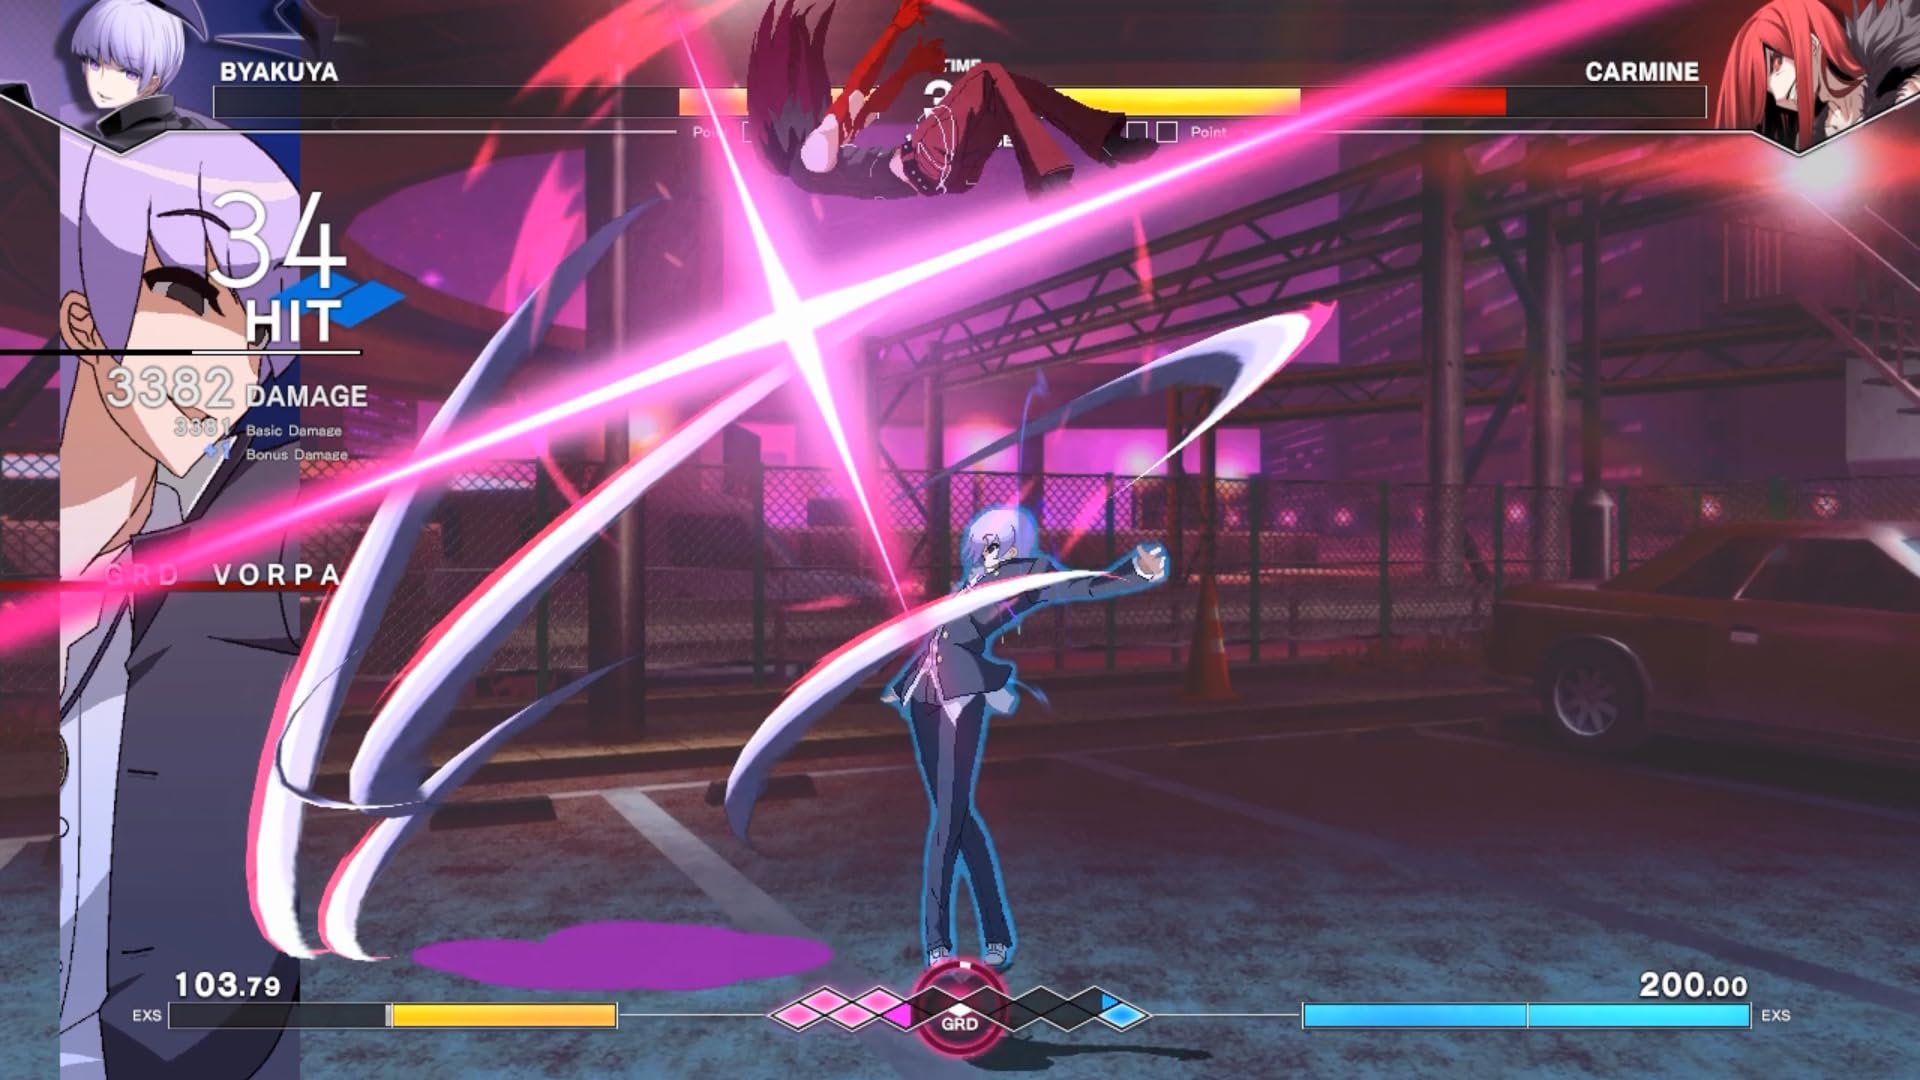 UNDER NIGHT IN-BIRTH II [Sys:Celes] - PlayStation 4